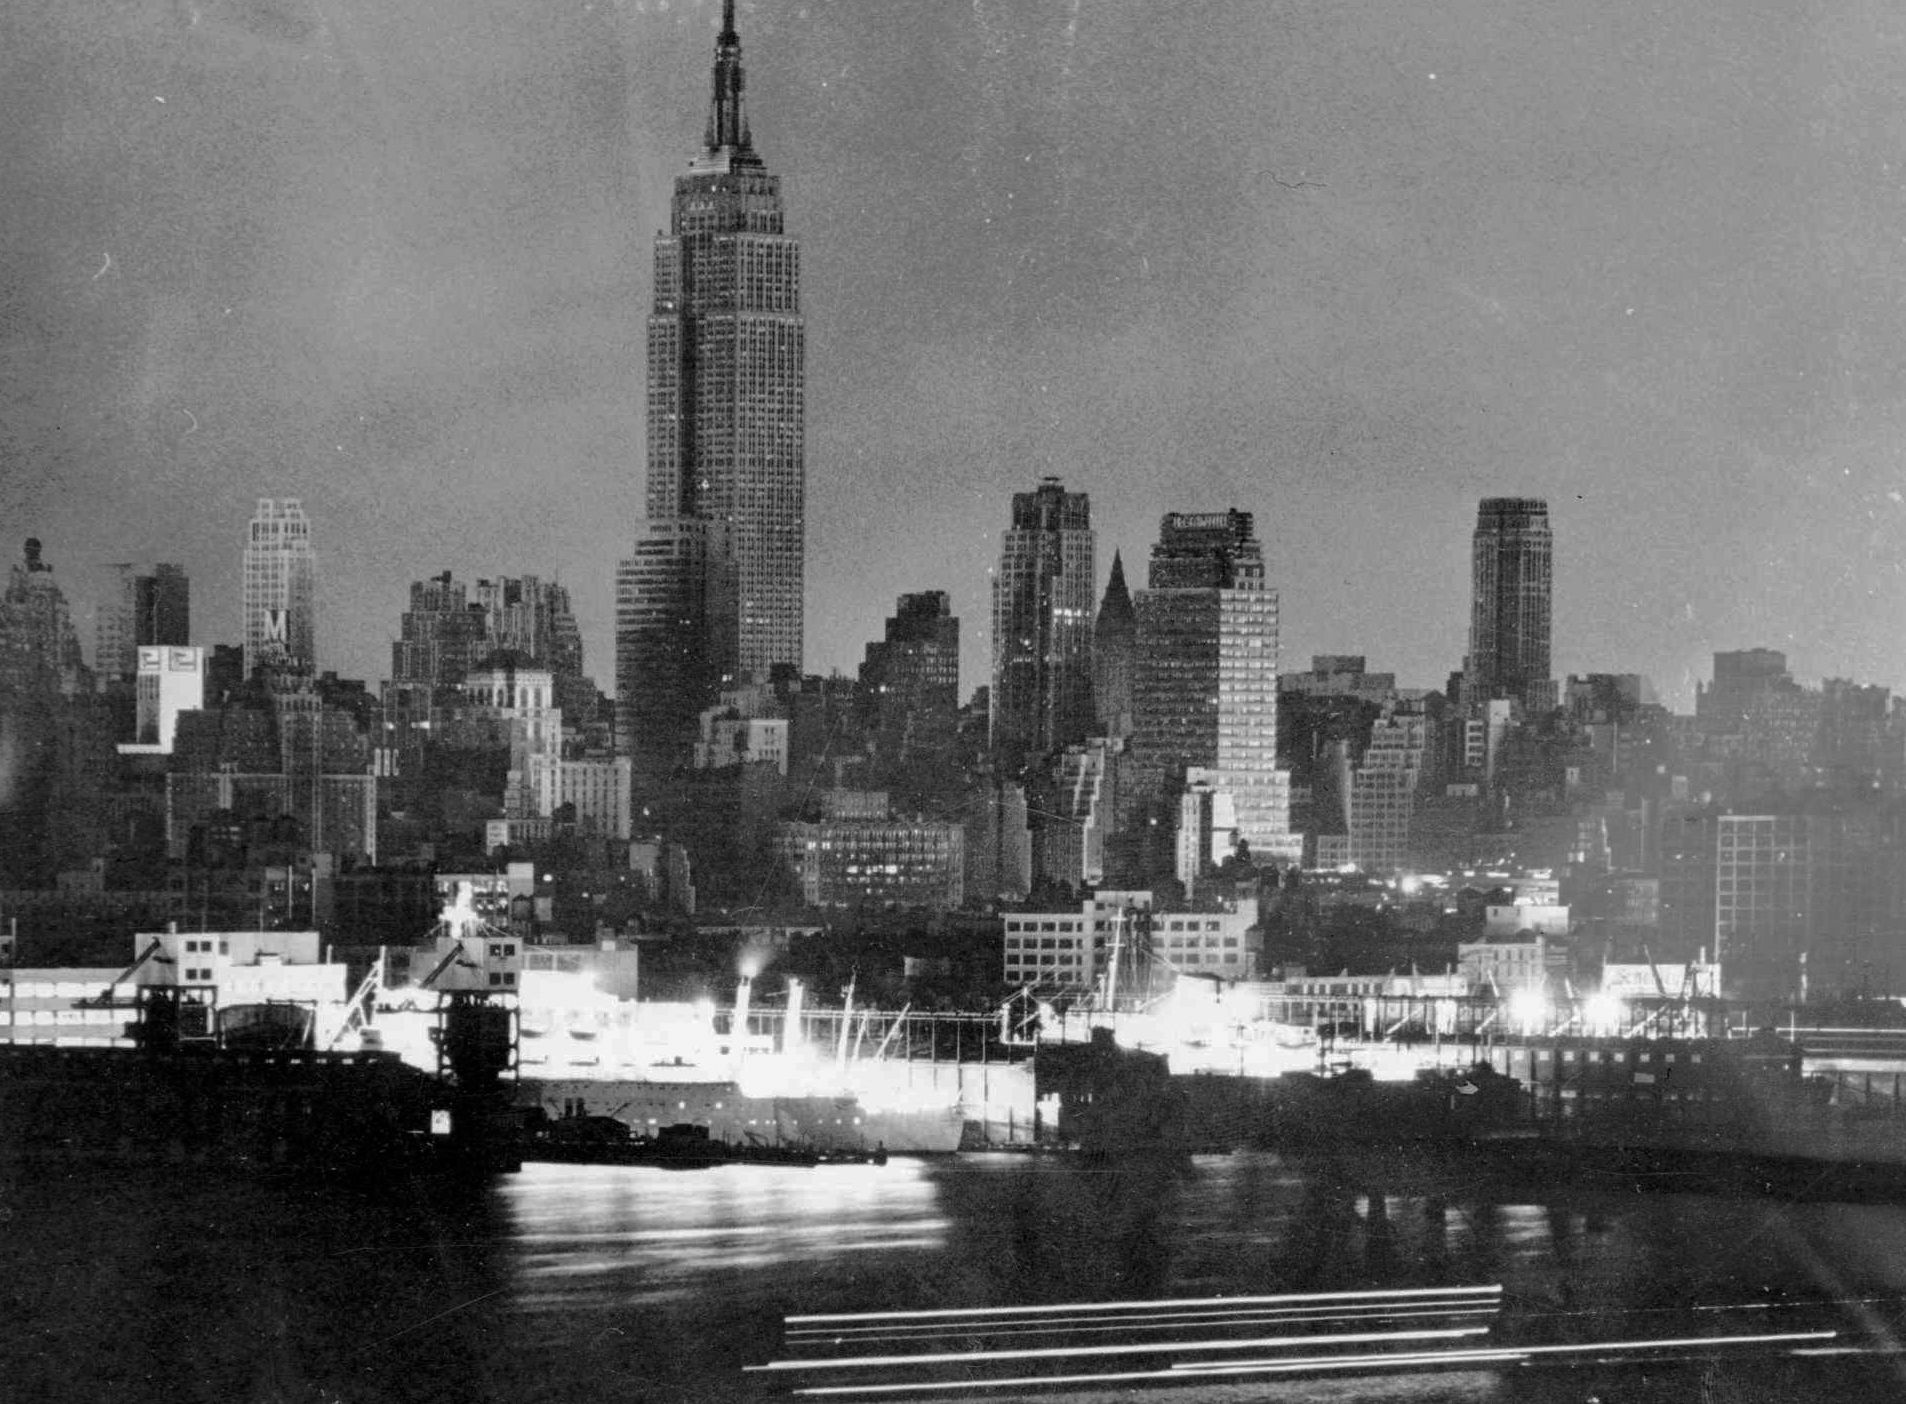 The Unlikely Story Of One Of The Biggest Blackouts In US History